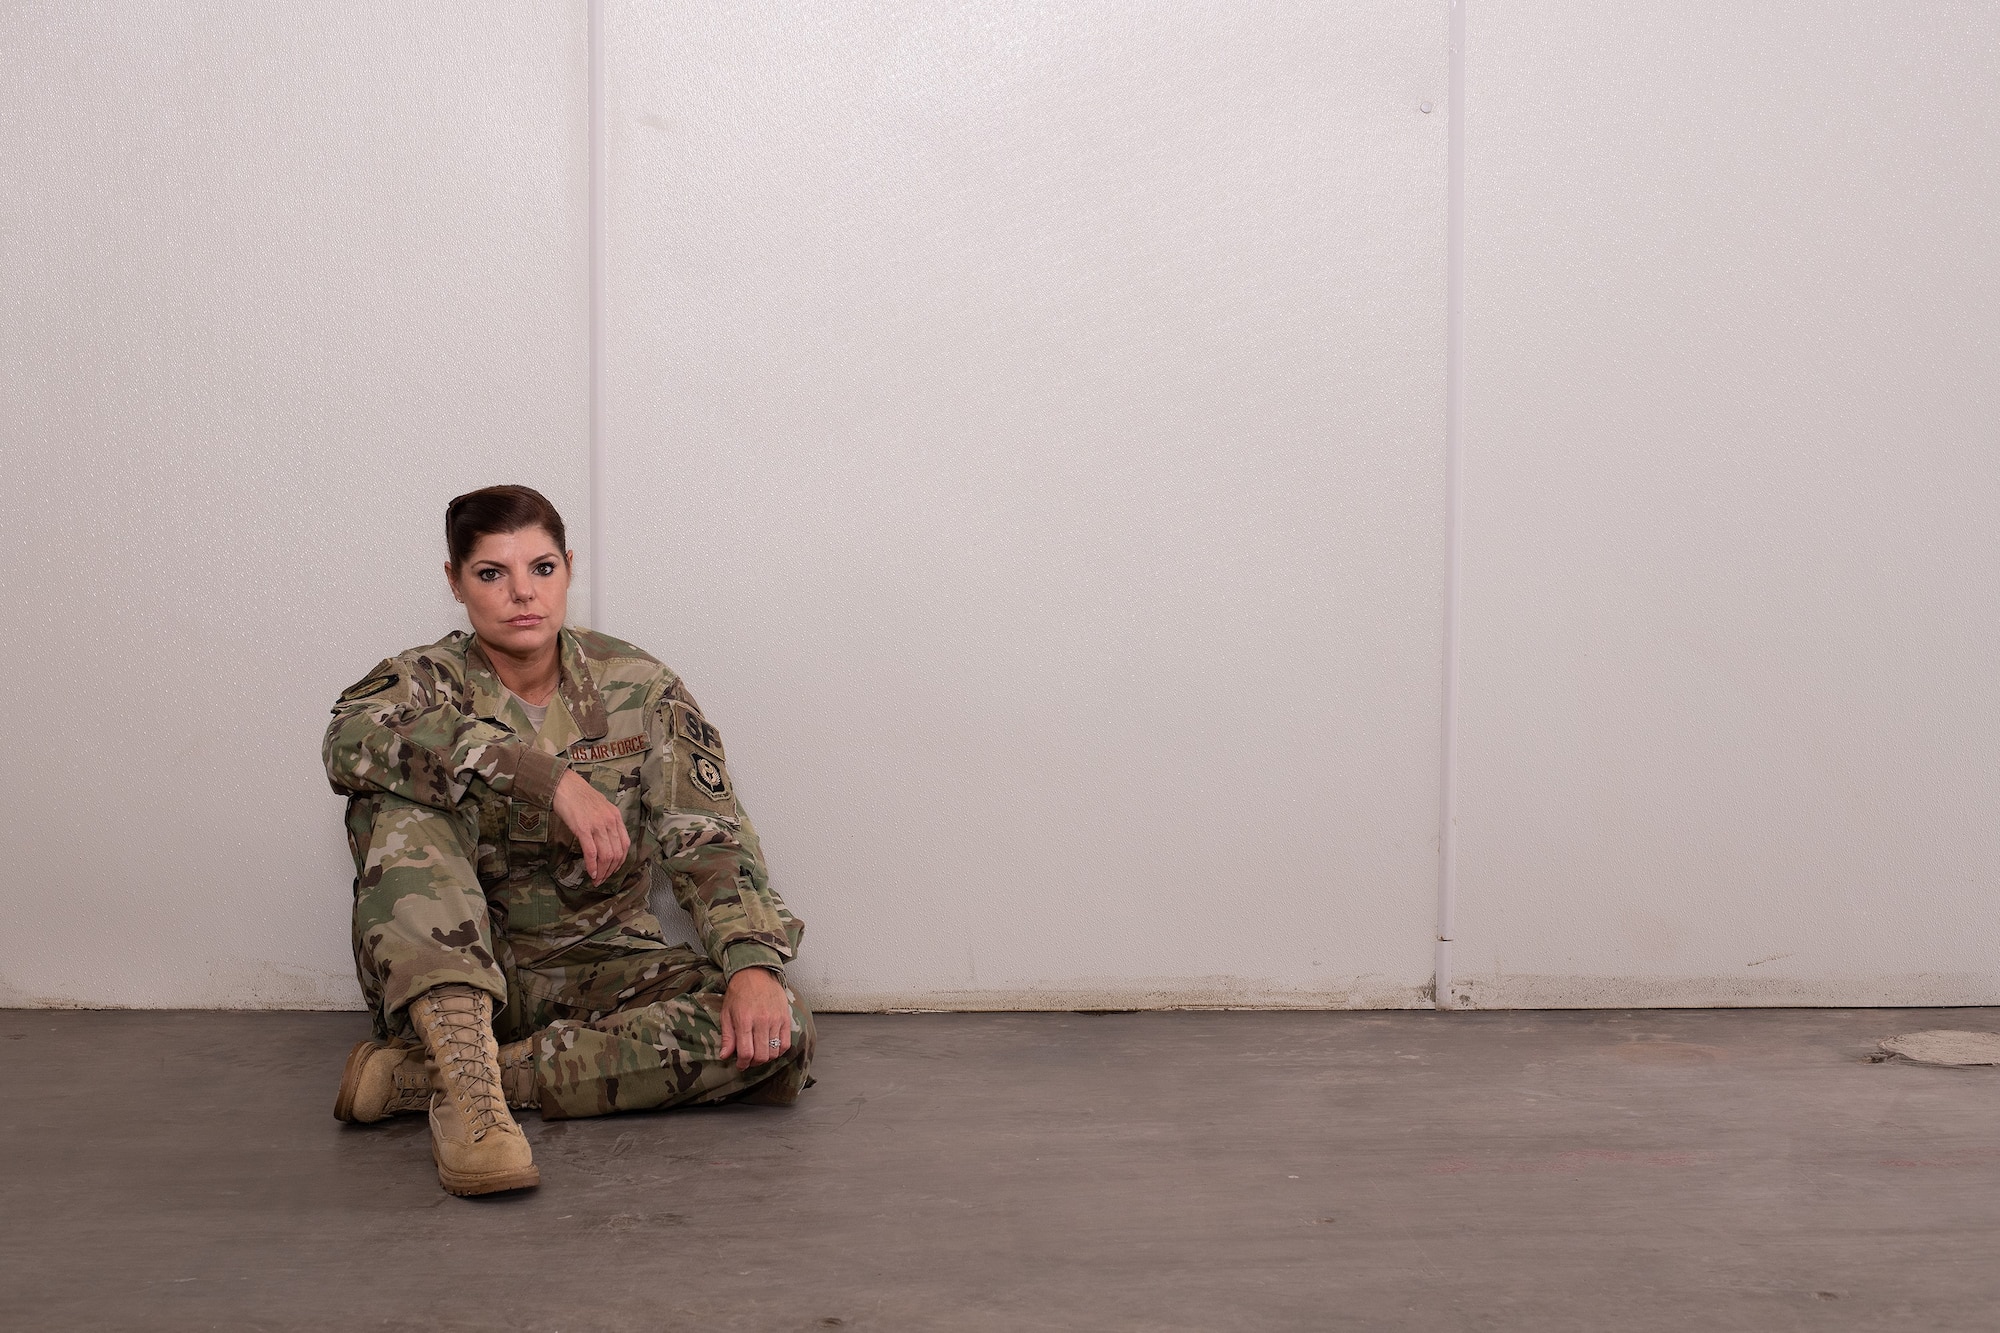 Staff Sgt. Ericka Costin, security forces at the 137th Special Operations Wing, poses for a portrait taken at Will Rogers Air National Guard Base in Oklahoma City, Aug. 28, 2019.